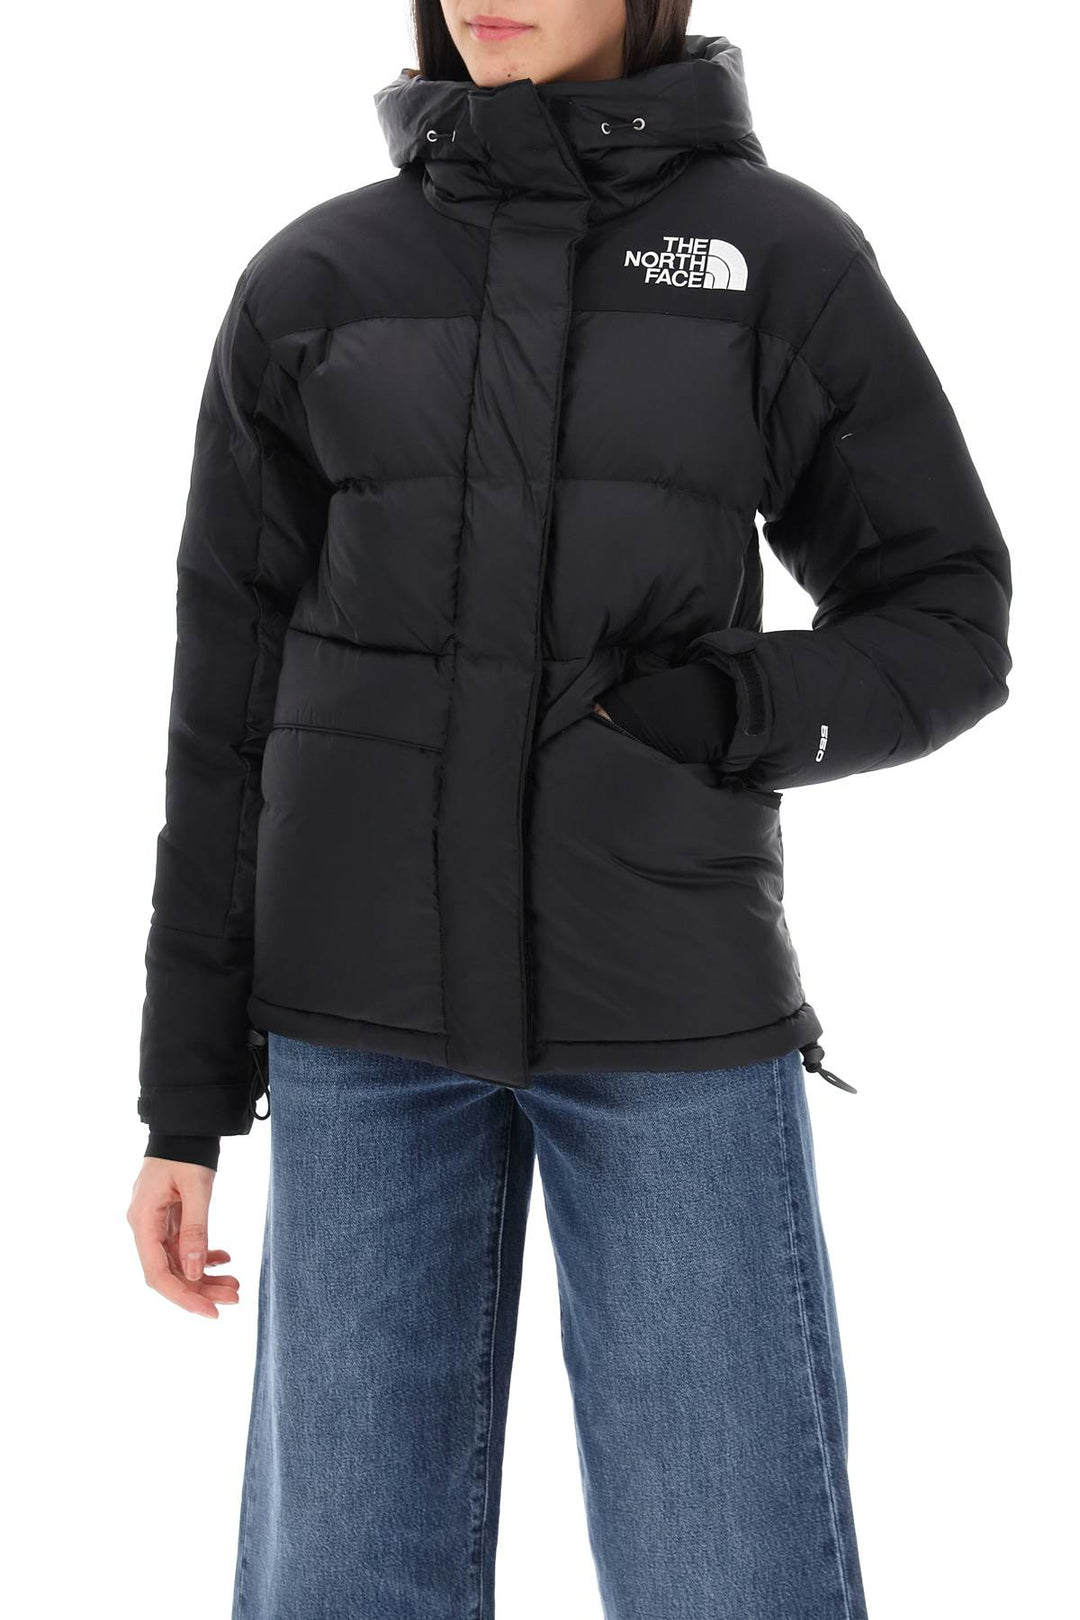 Parka Himalayan In Ripstop - The North Face - Donna